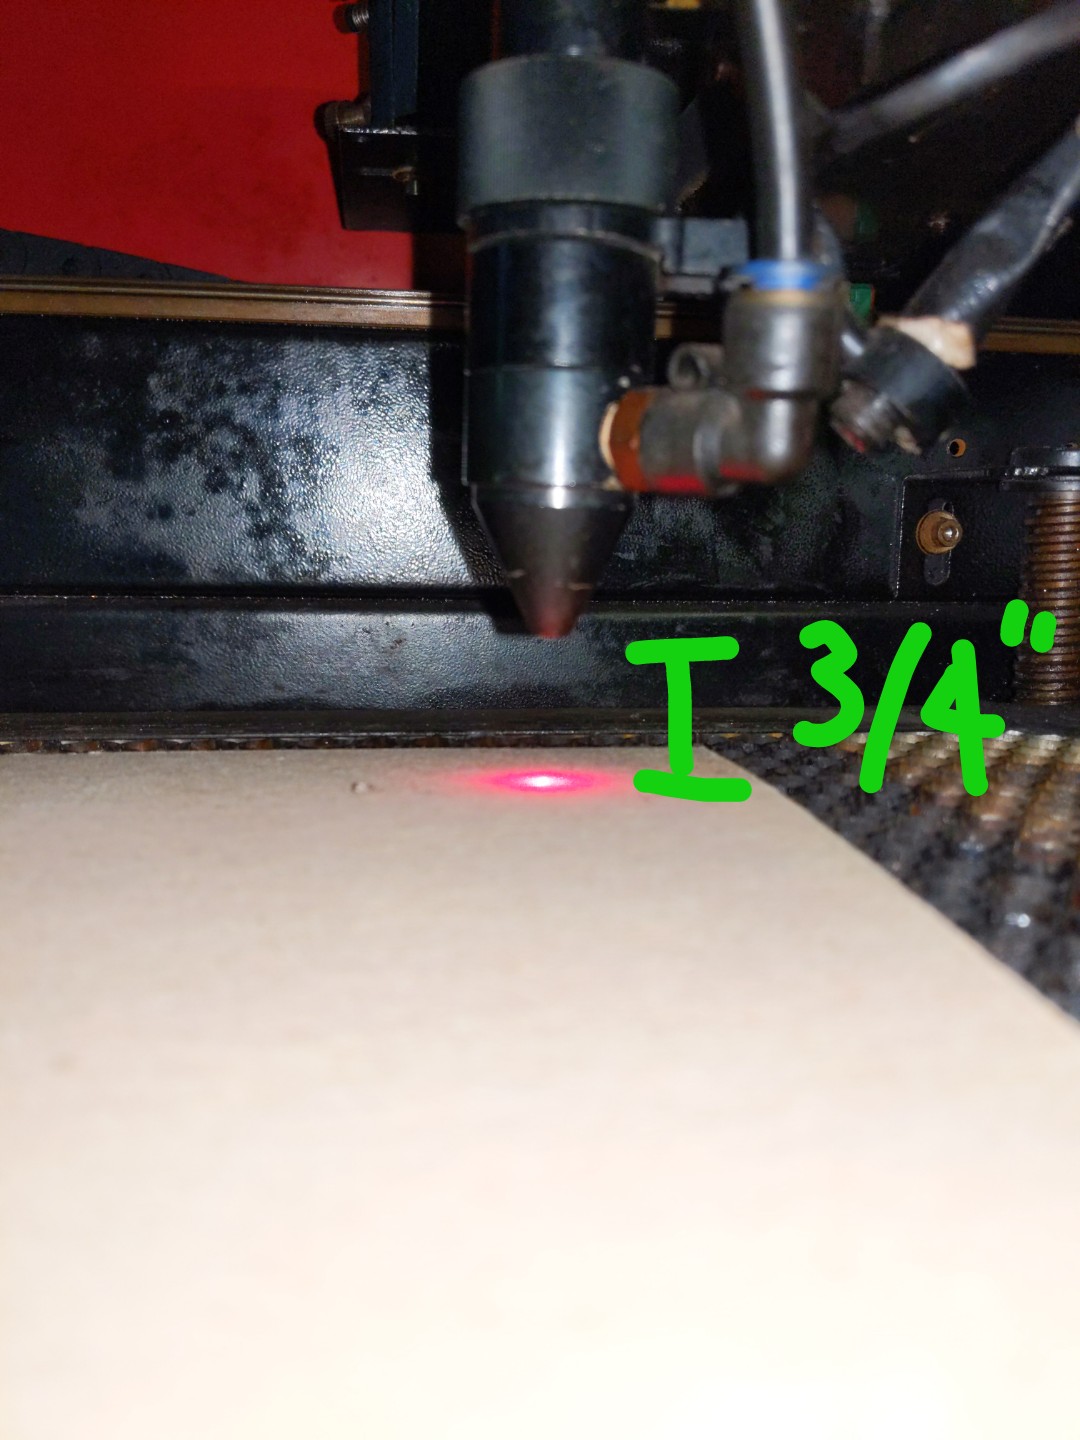 showing correct bed height for laser